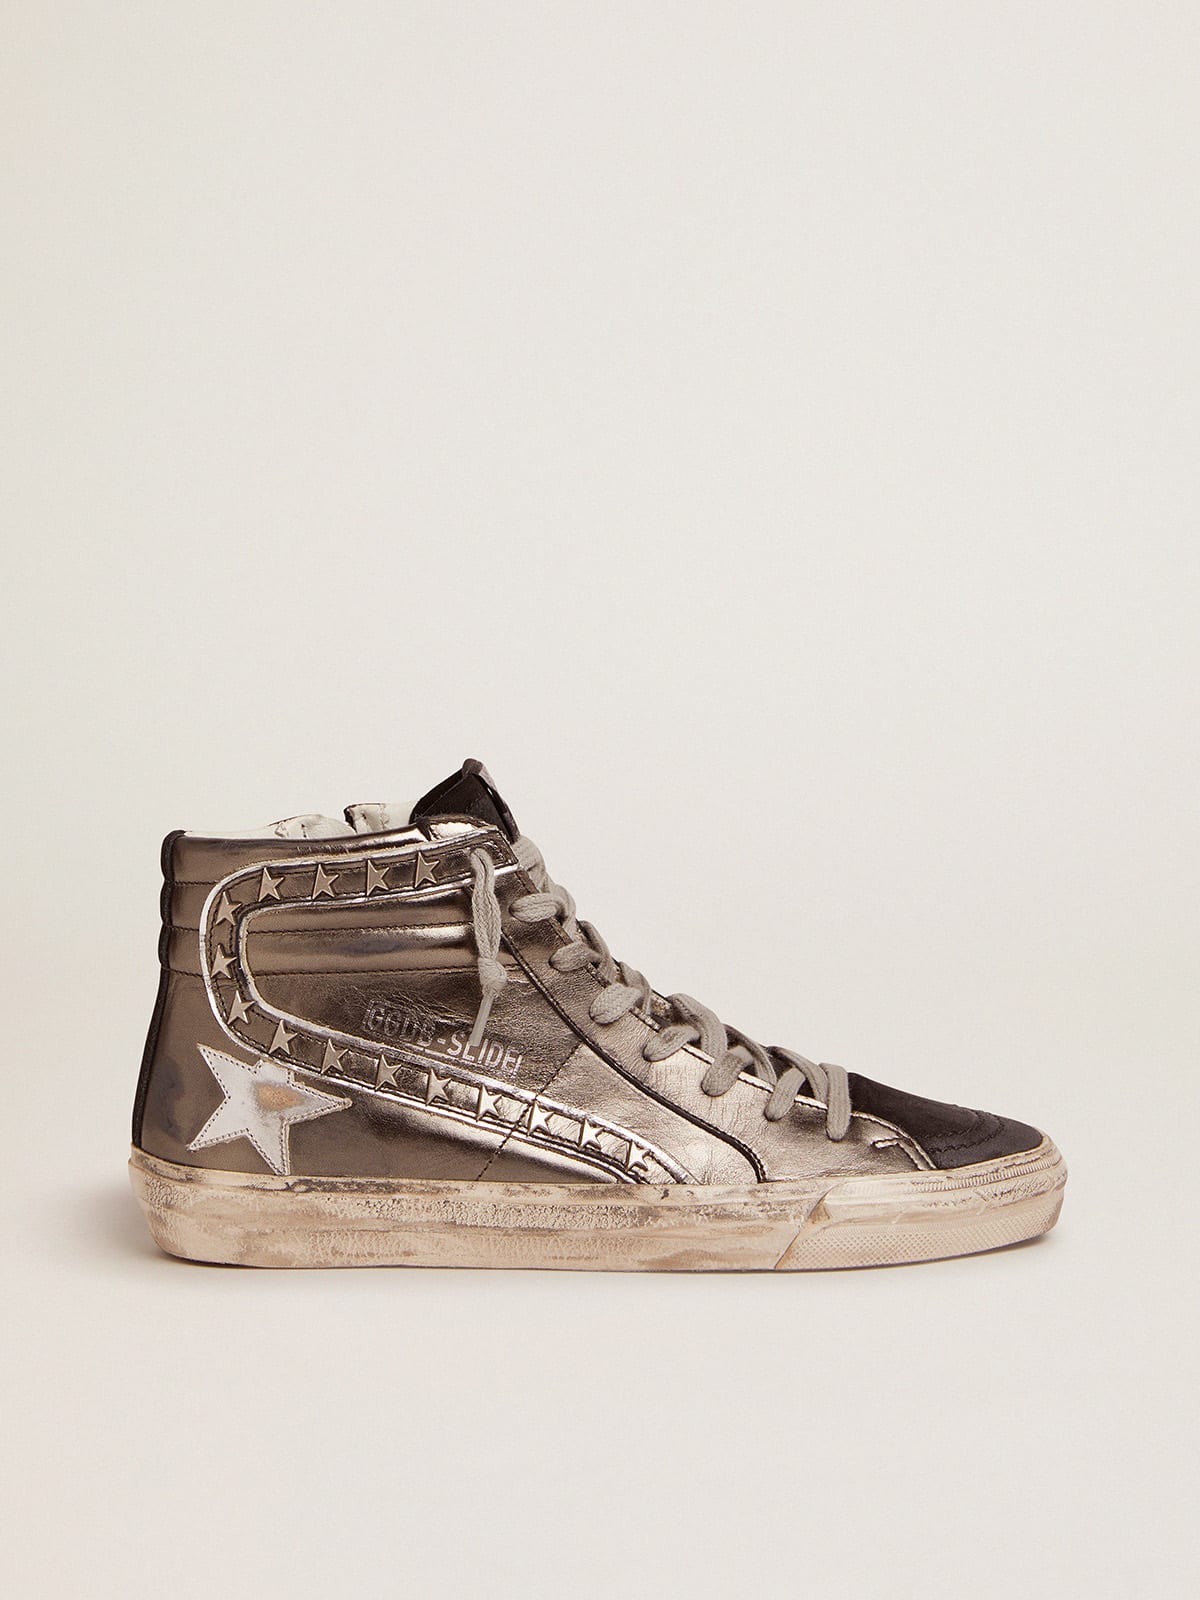 Golden Goose - Women's Slide with silver laminated leather upper and studs in 